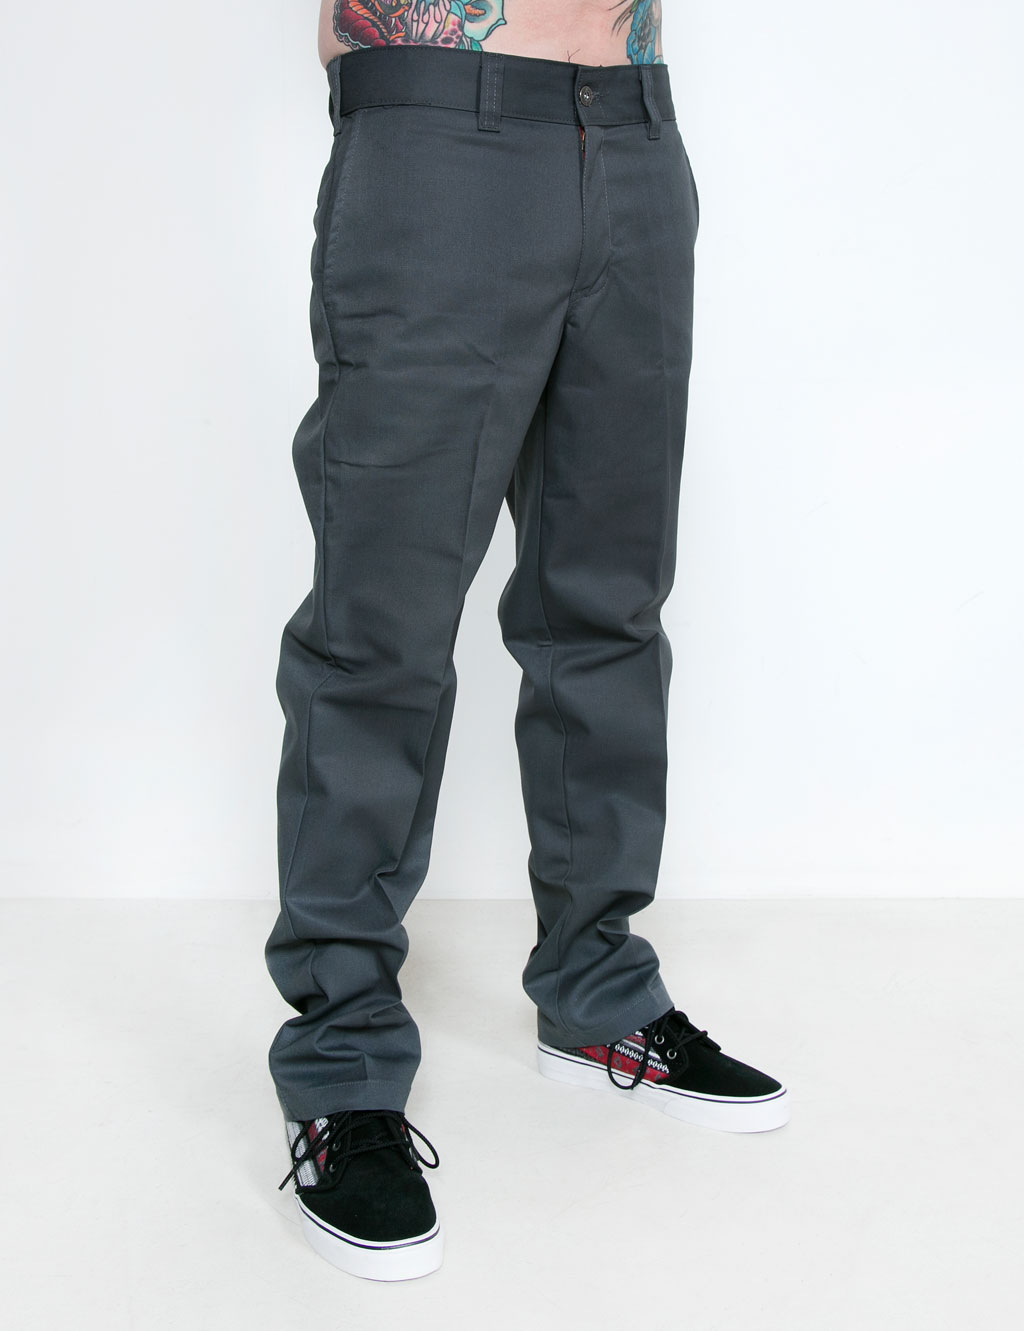 Dickies - 67 Collection Industrial Work Pant - Charcoal Grey